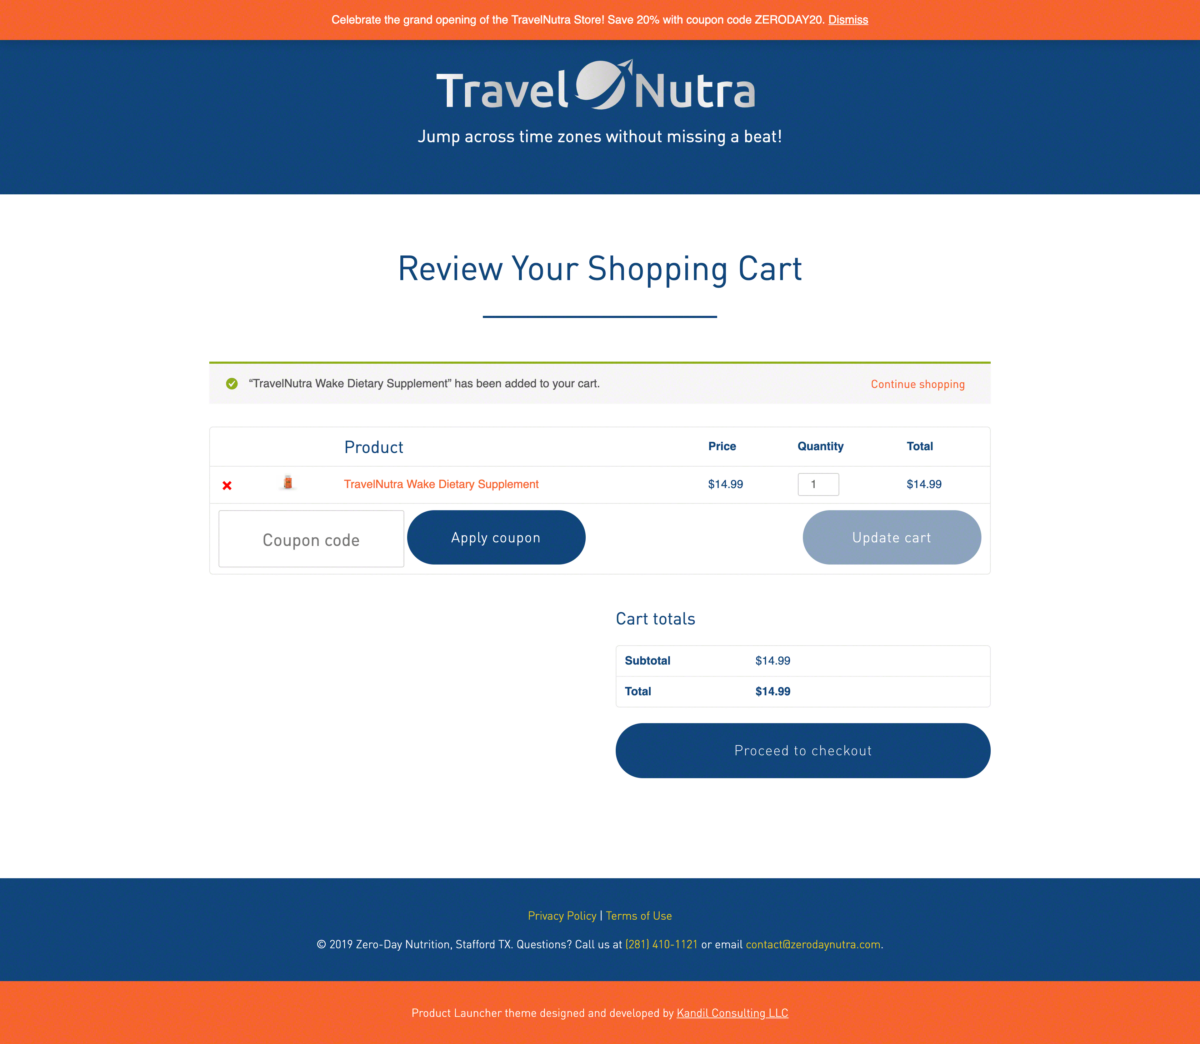 Website design for TravelNutra created by Dalya Kandil for GB nutrition and ZeroDay Nutra. ZeroDay Nutrition is a company based out of Stafford, TX. Original TravelNutra logo provided by the manufacturing client.